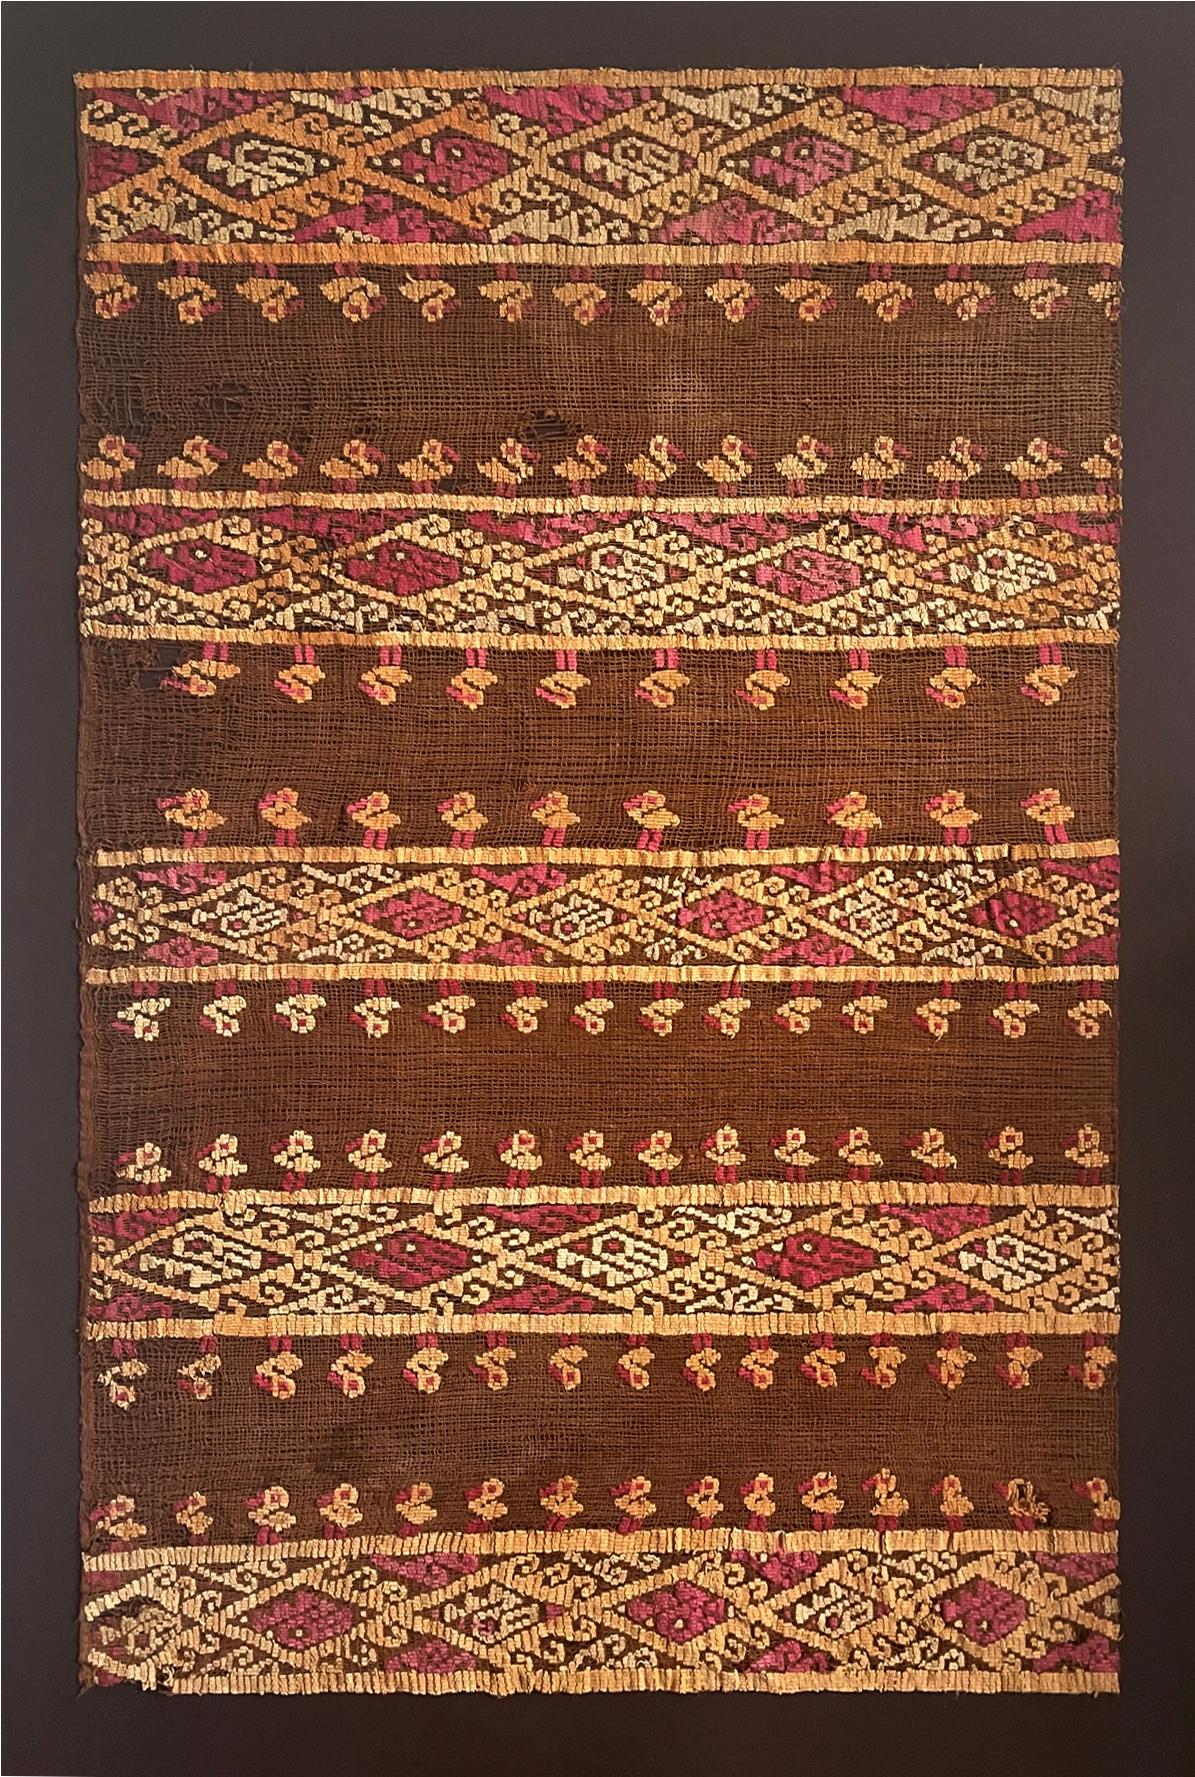 Peruvian Framed Pre-Columbian Woven Textile from Chancay Culture For Sale